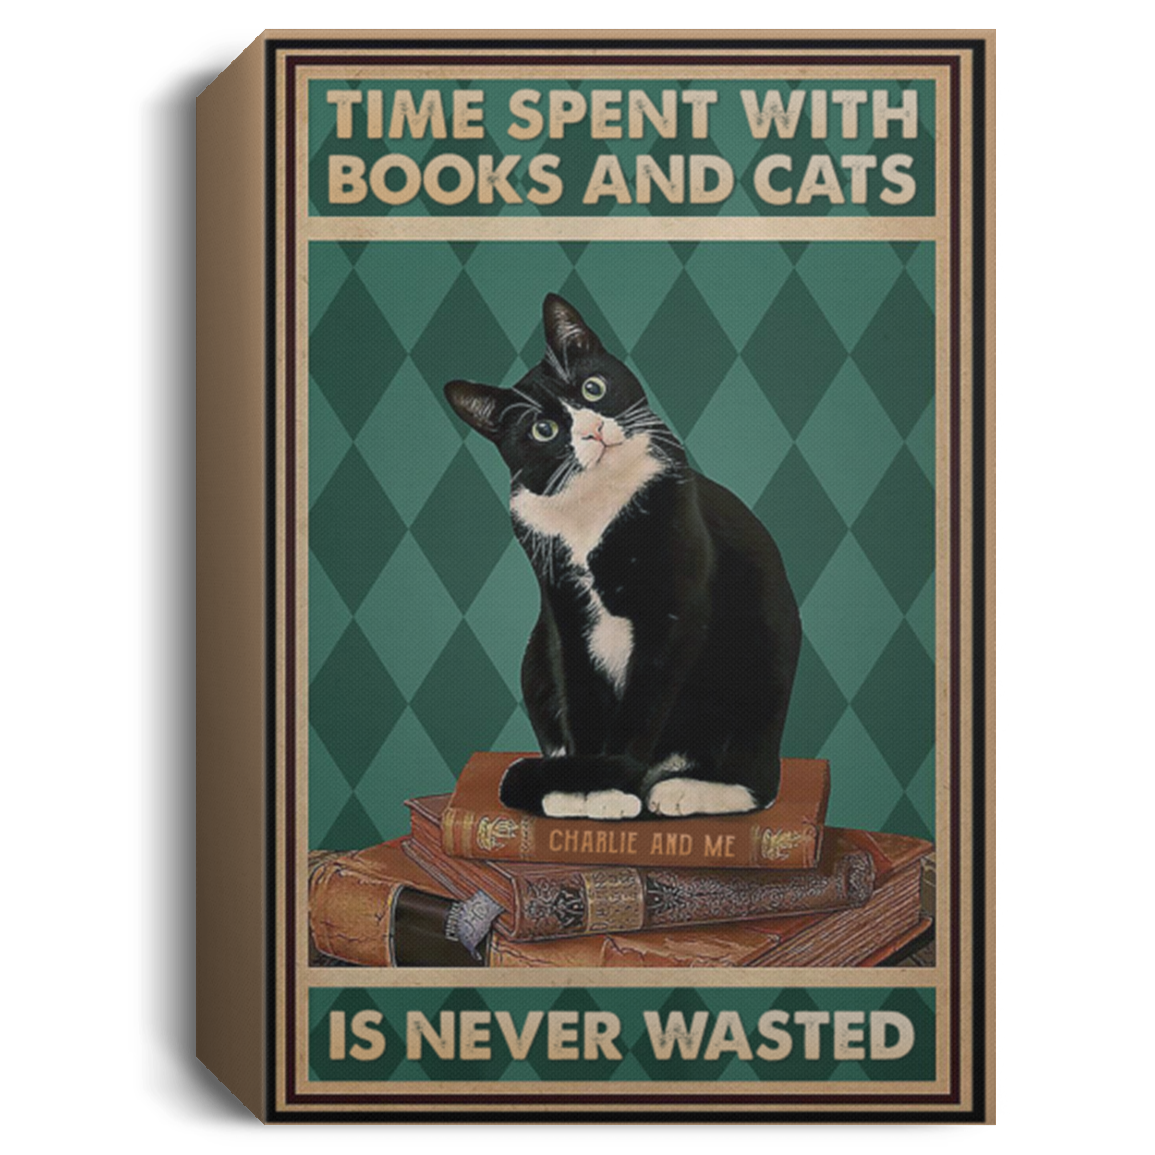 BOOKS AND CATS